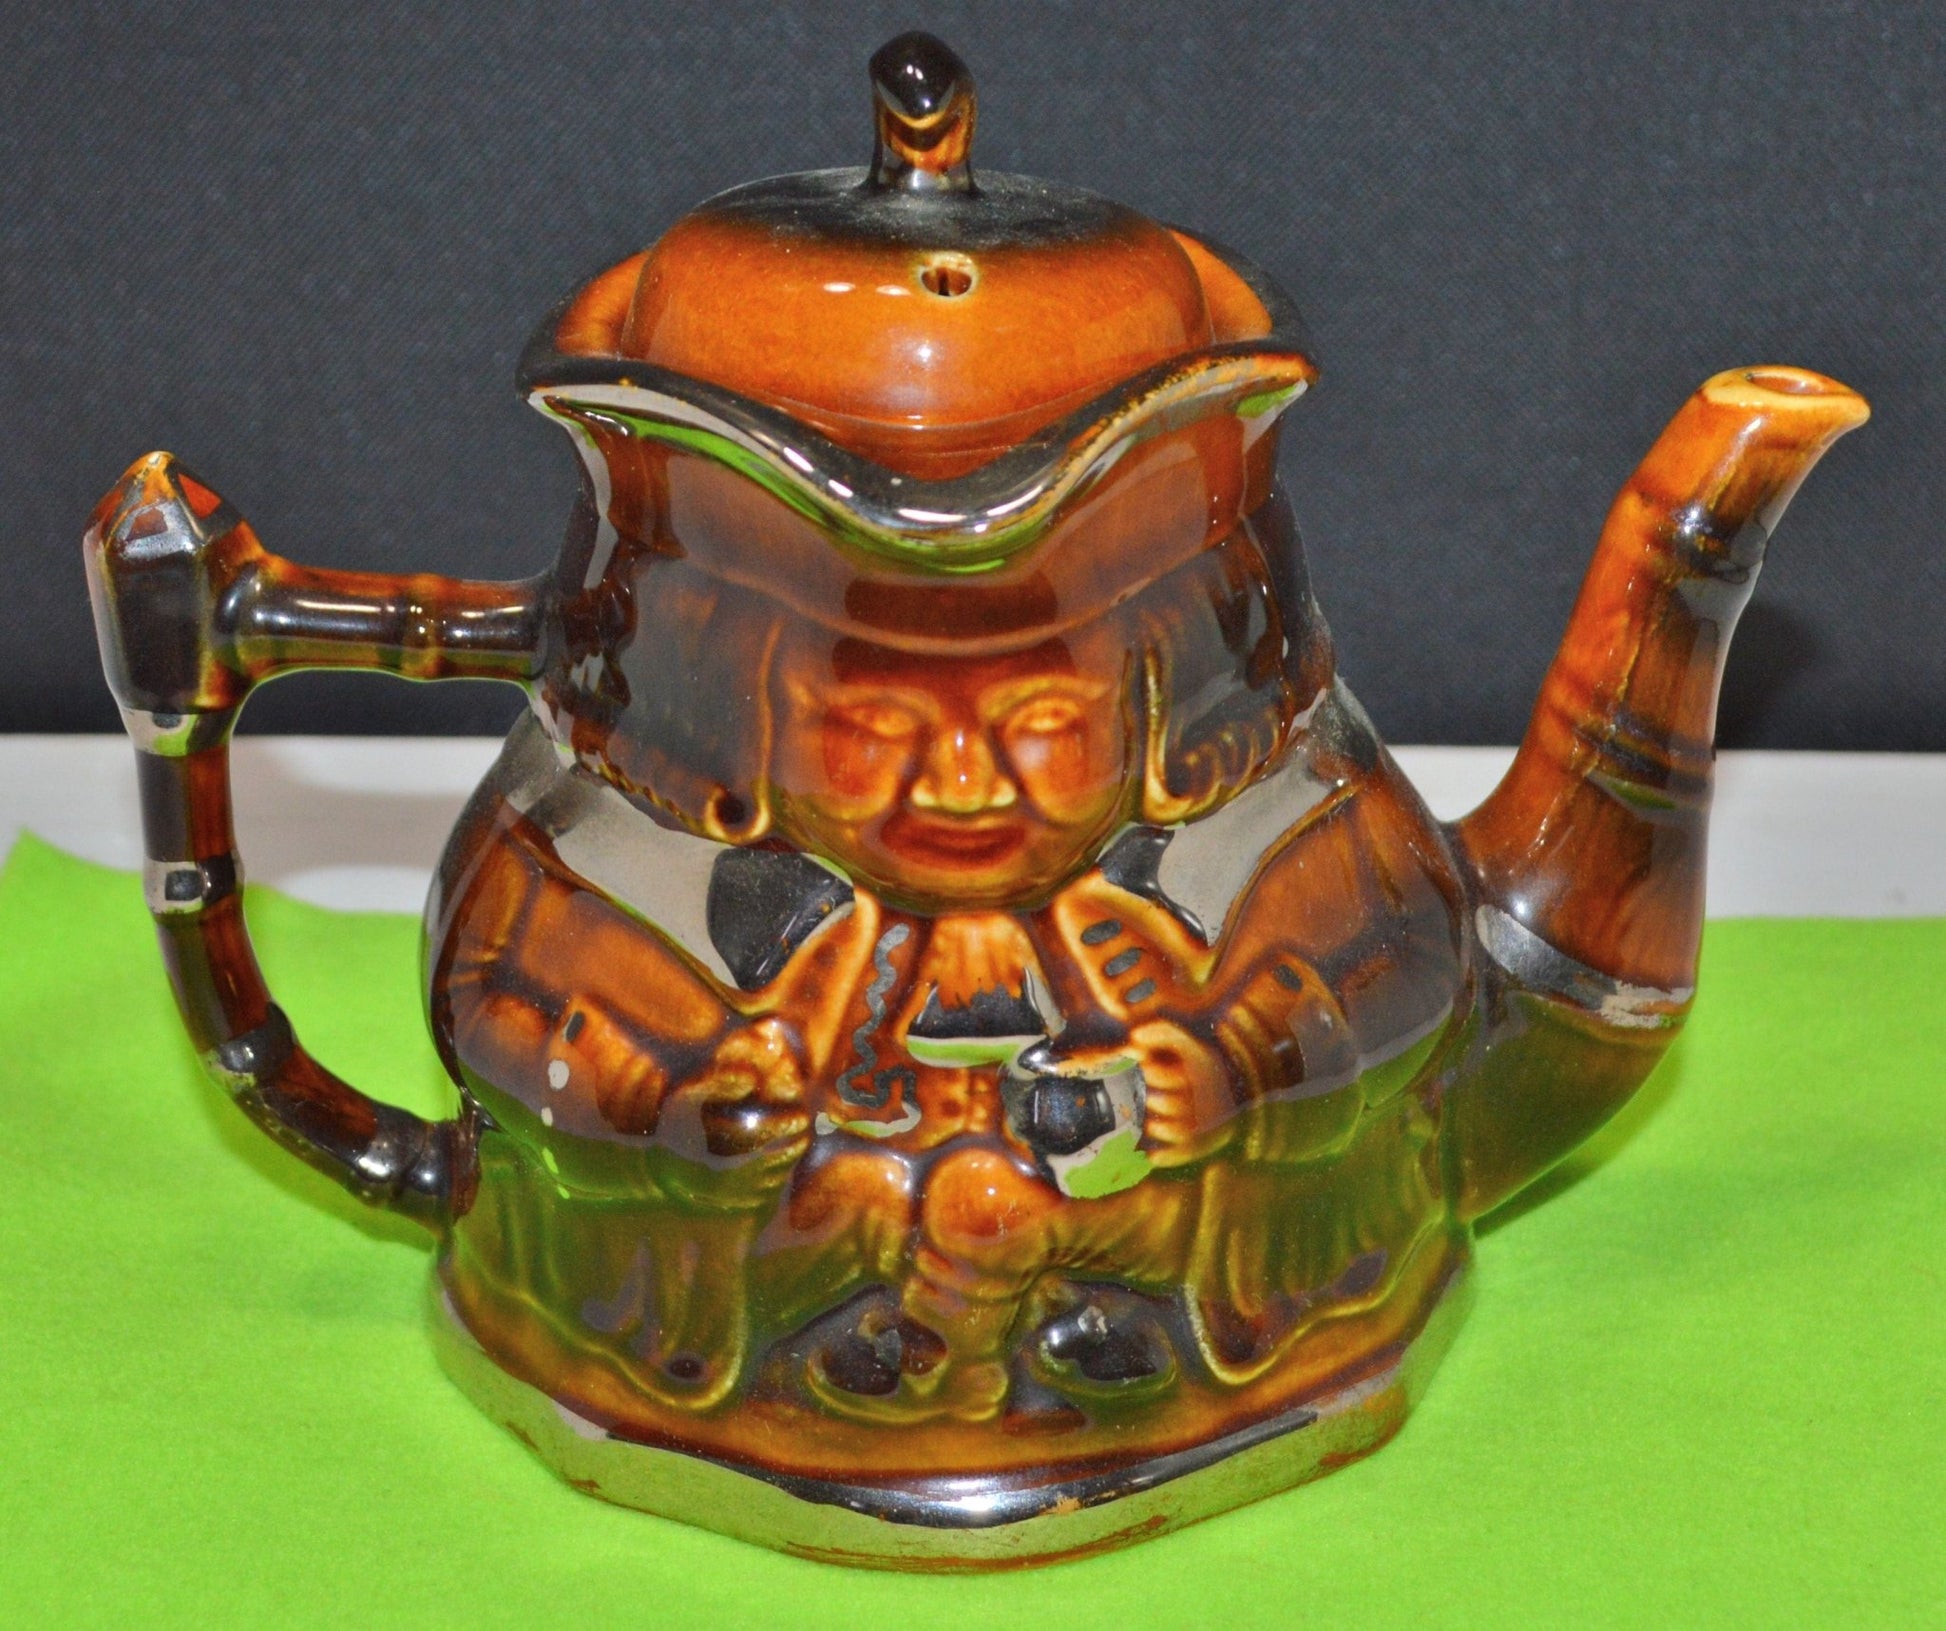 PRICE KENSINGTON DOUBLE FACED CHARACTER TEAPOT(PREVIOUSLY OWNED) GOOD CONDITION - TMD167207